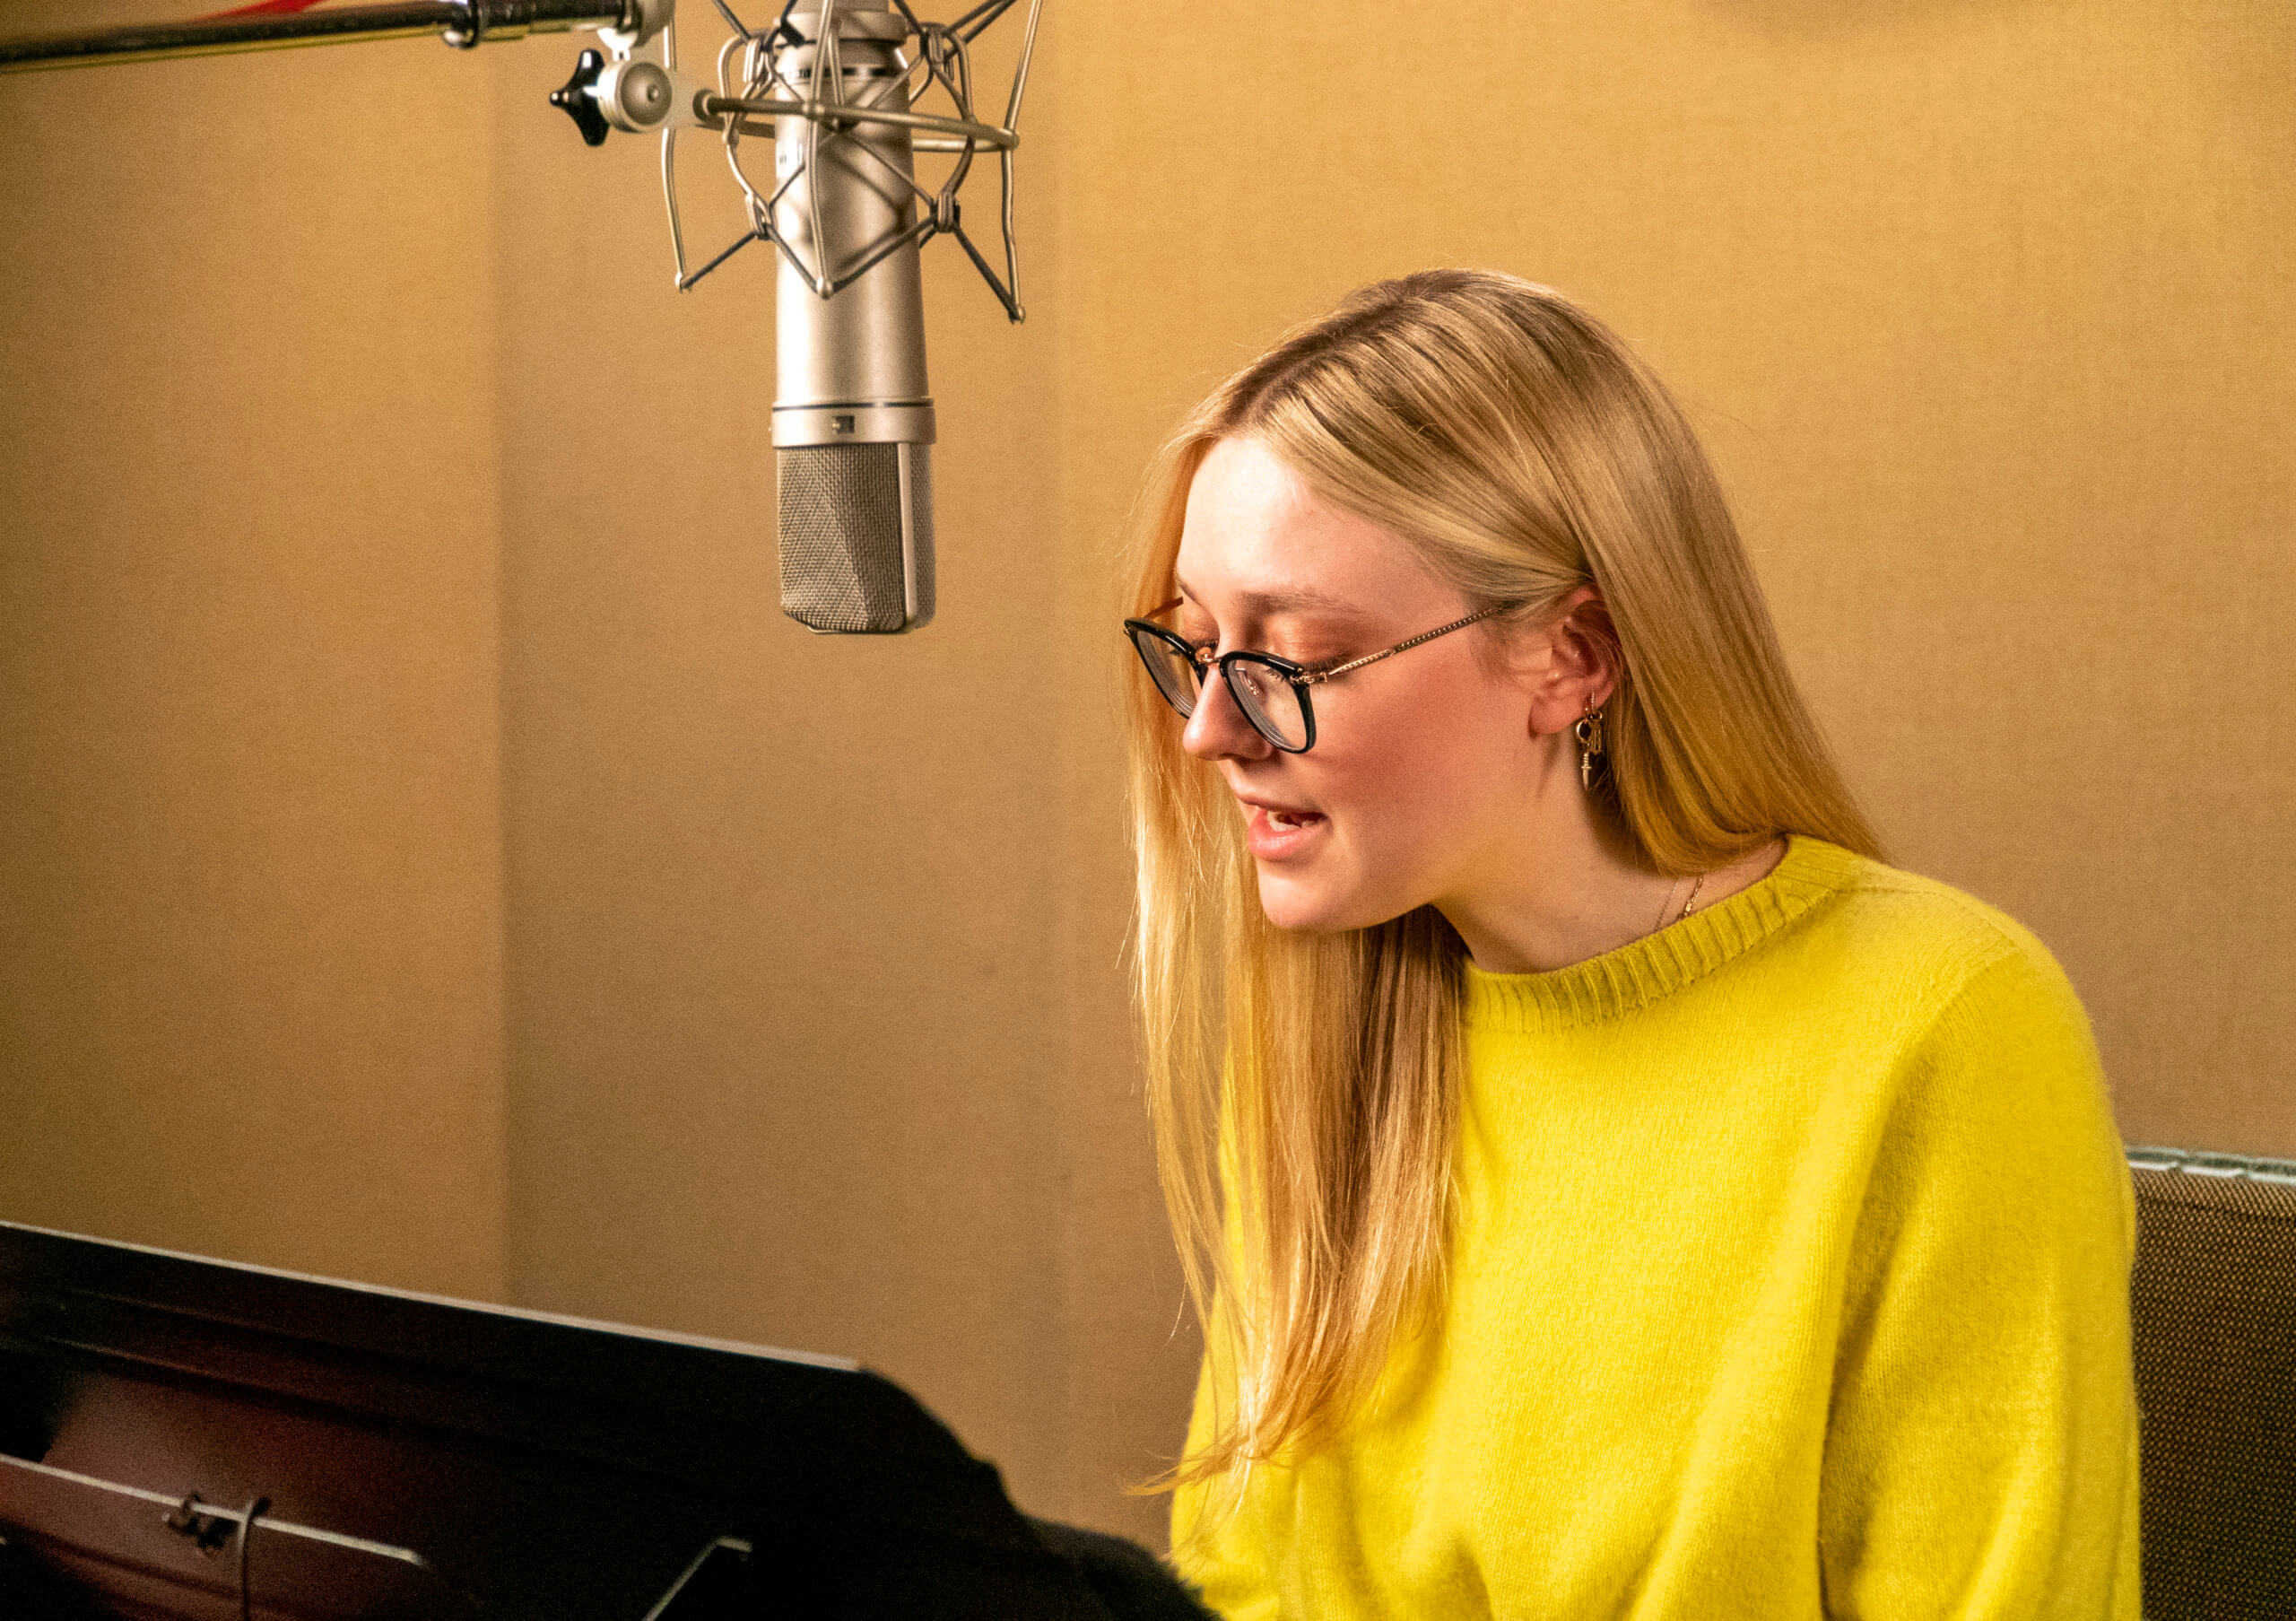 Listen to Dakota Fanning Narrate Veronica Roth's New Novel CHOSEN ONES in  Exclusive Audible Clip - Daily Dead